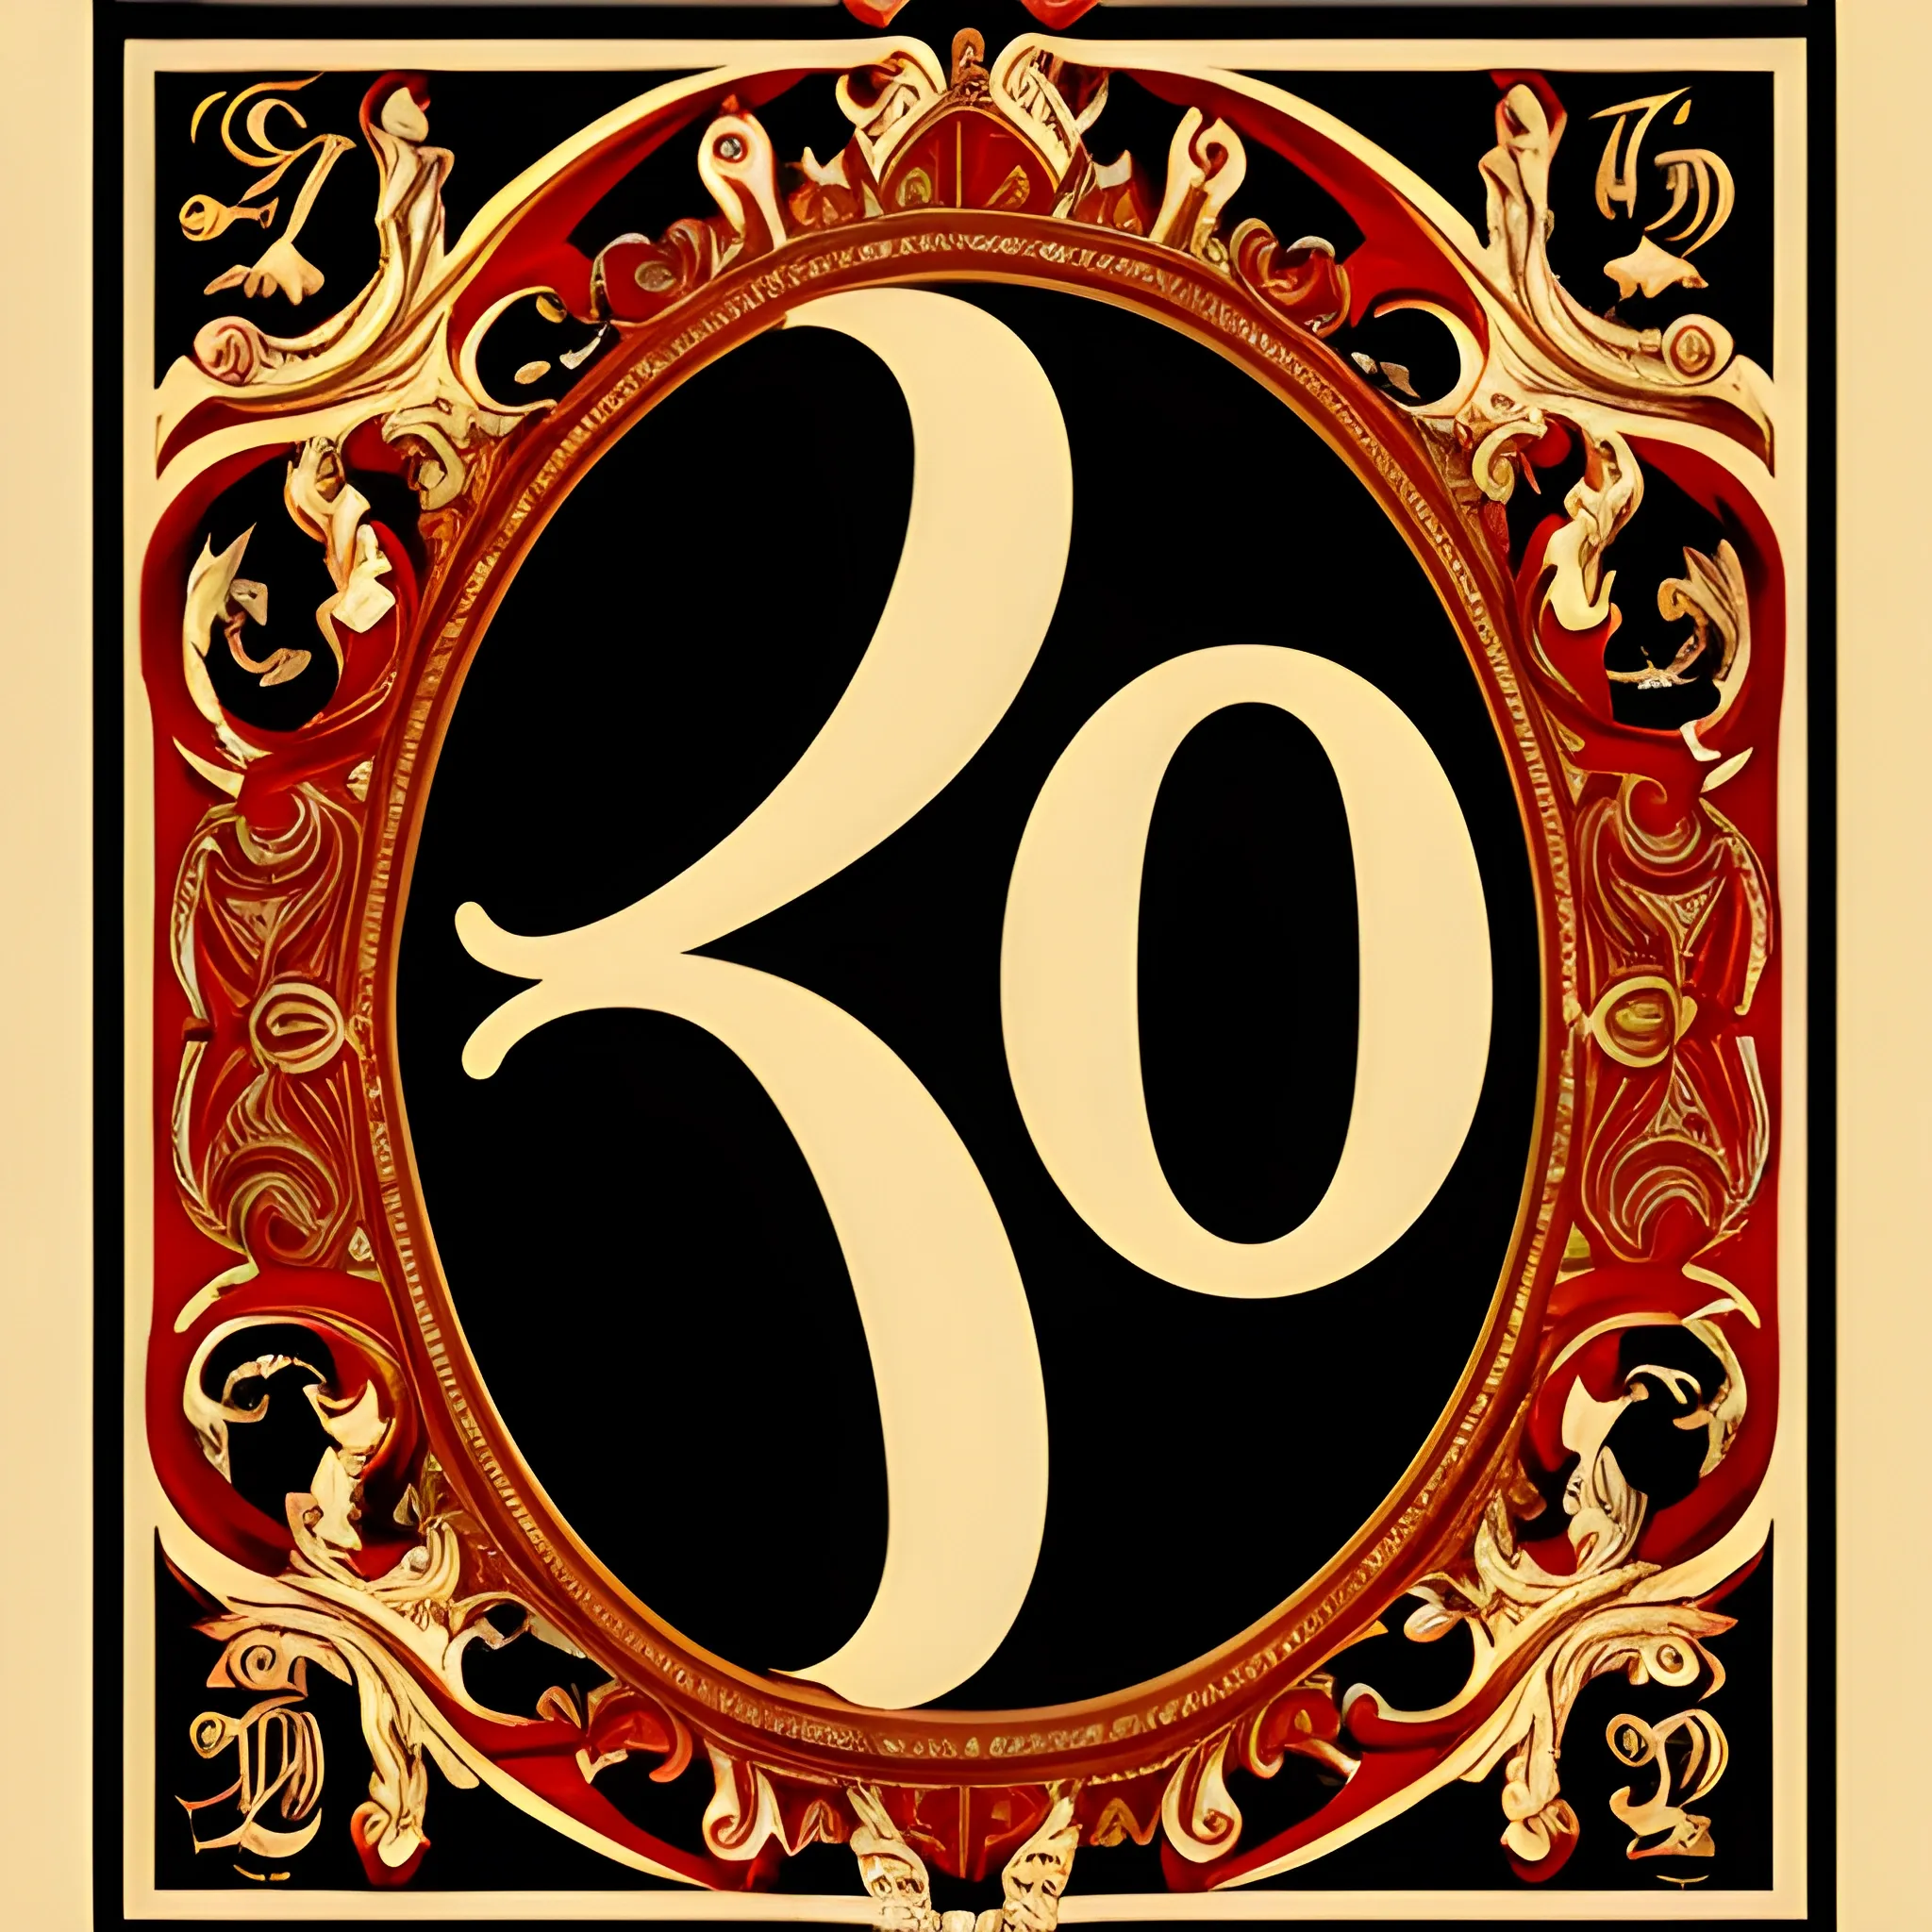 Poster with black background where it says in Elizabethan typography letters, a number 9 and the letters oz to its right in red color, Cartoon